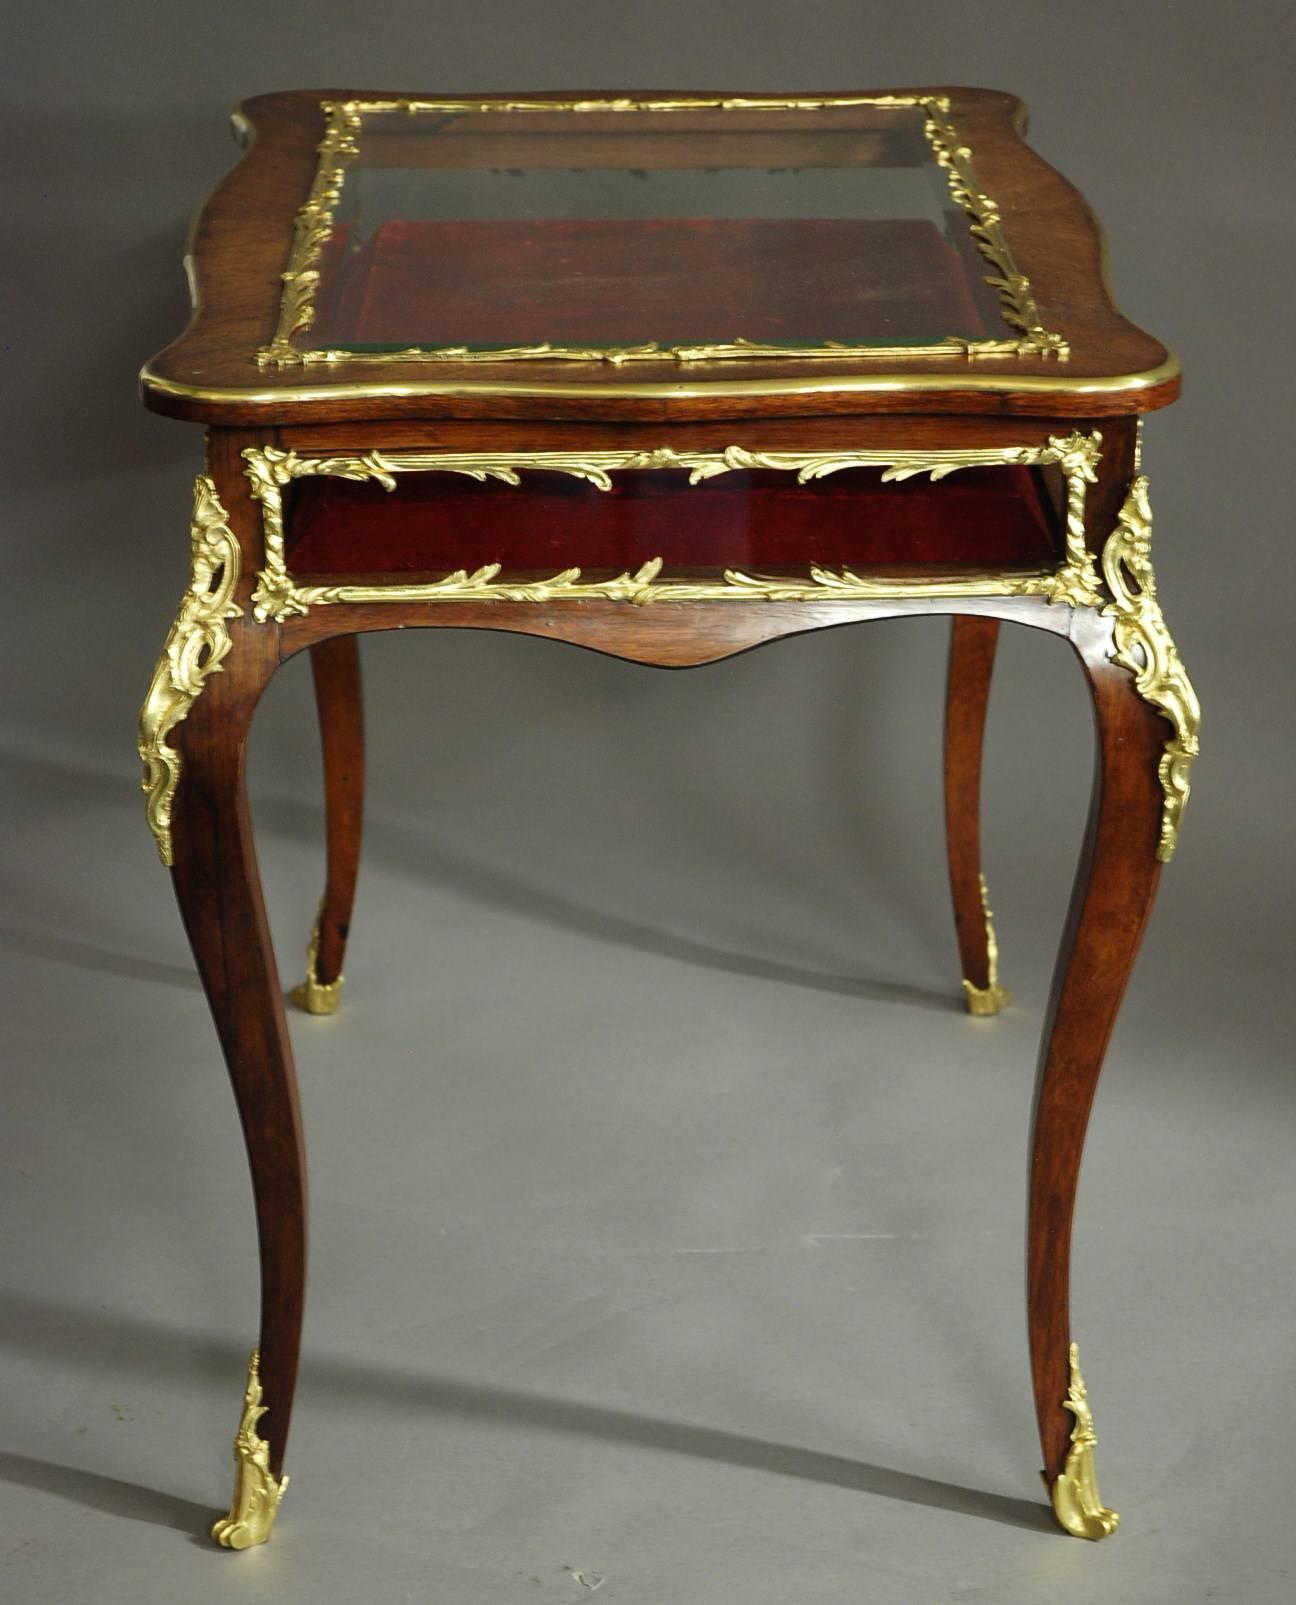 Ormolu 19th Century English Rosewood Freestanding Bijouterie Table of Large Proportions For Sale